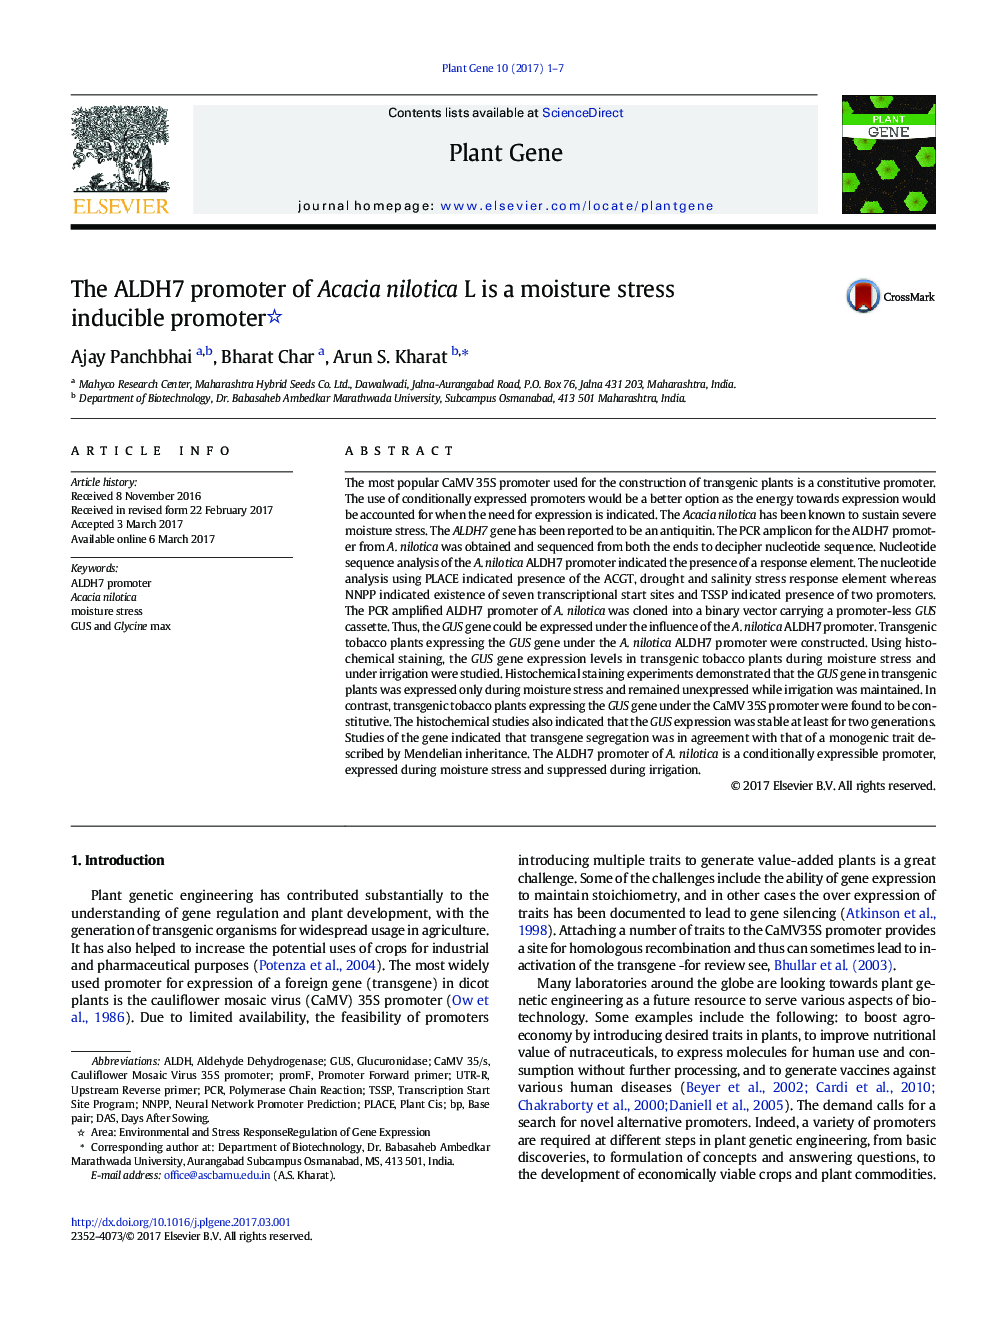 The ALDH7 promoter of Acacia nilotica L is a moisture stress inducible promoter